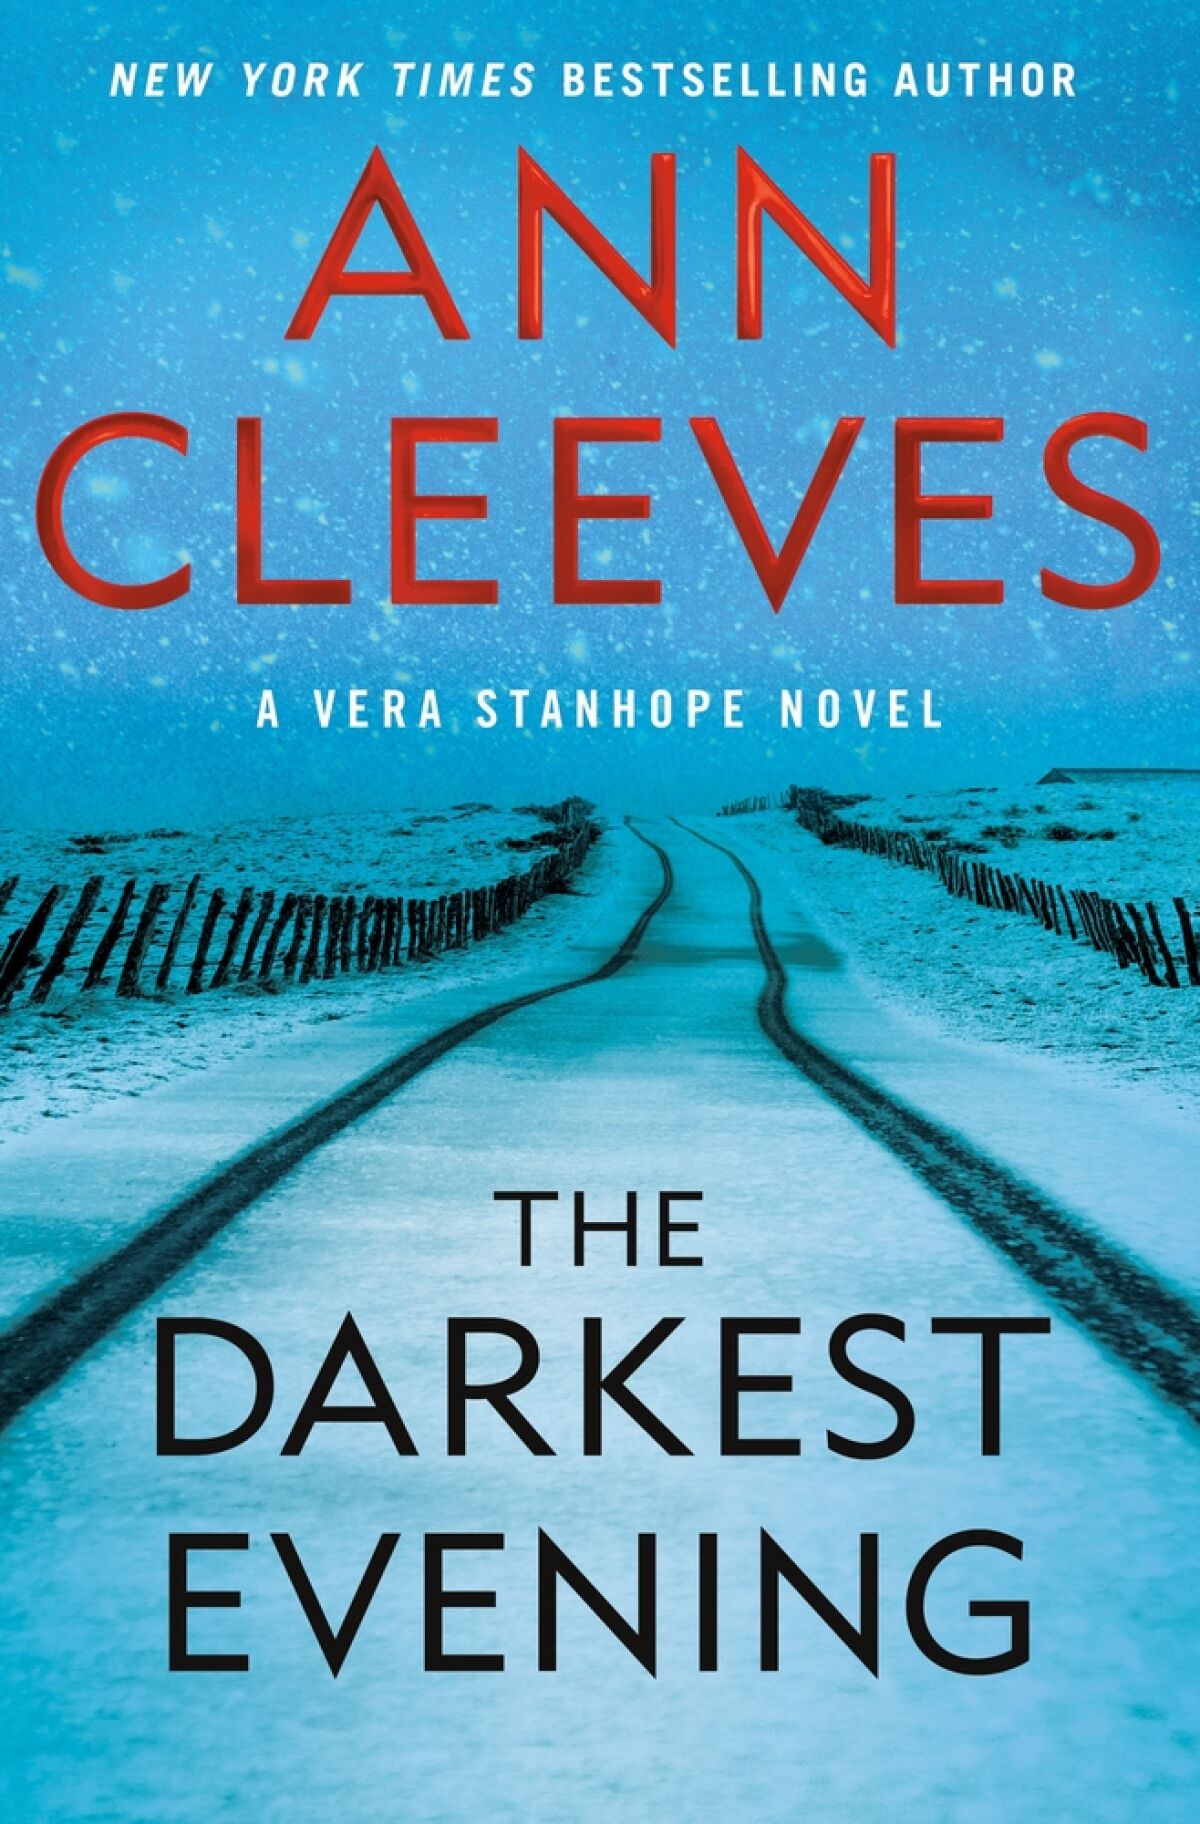 Book jacket for "The Darkest Evening: A Vera Stanhope Novel" by Ann Cleeves.